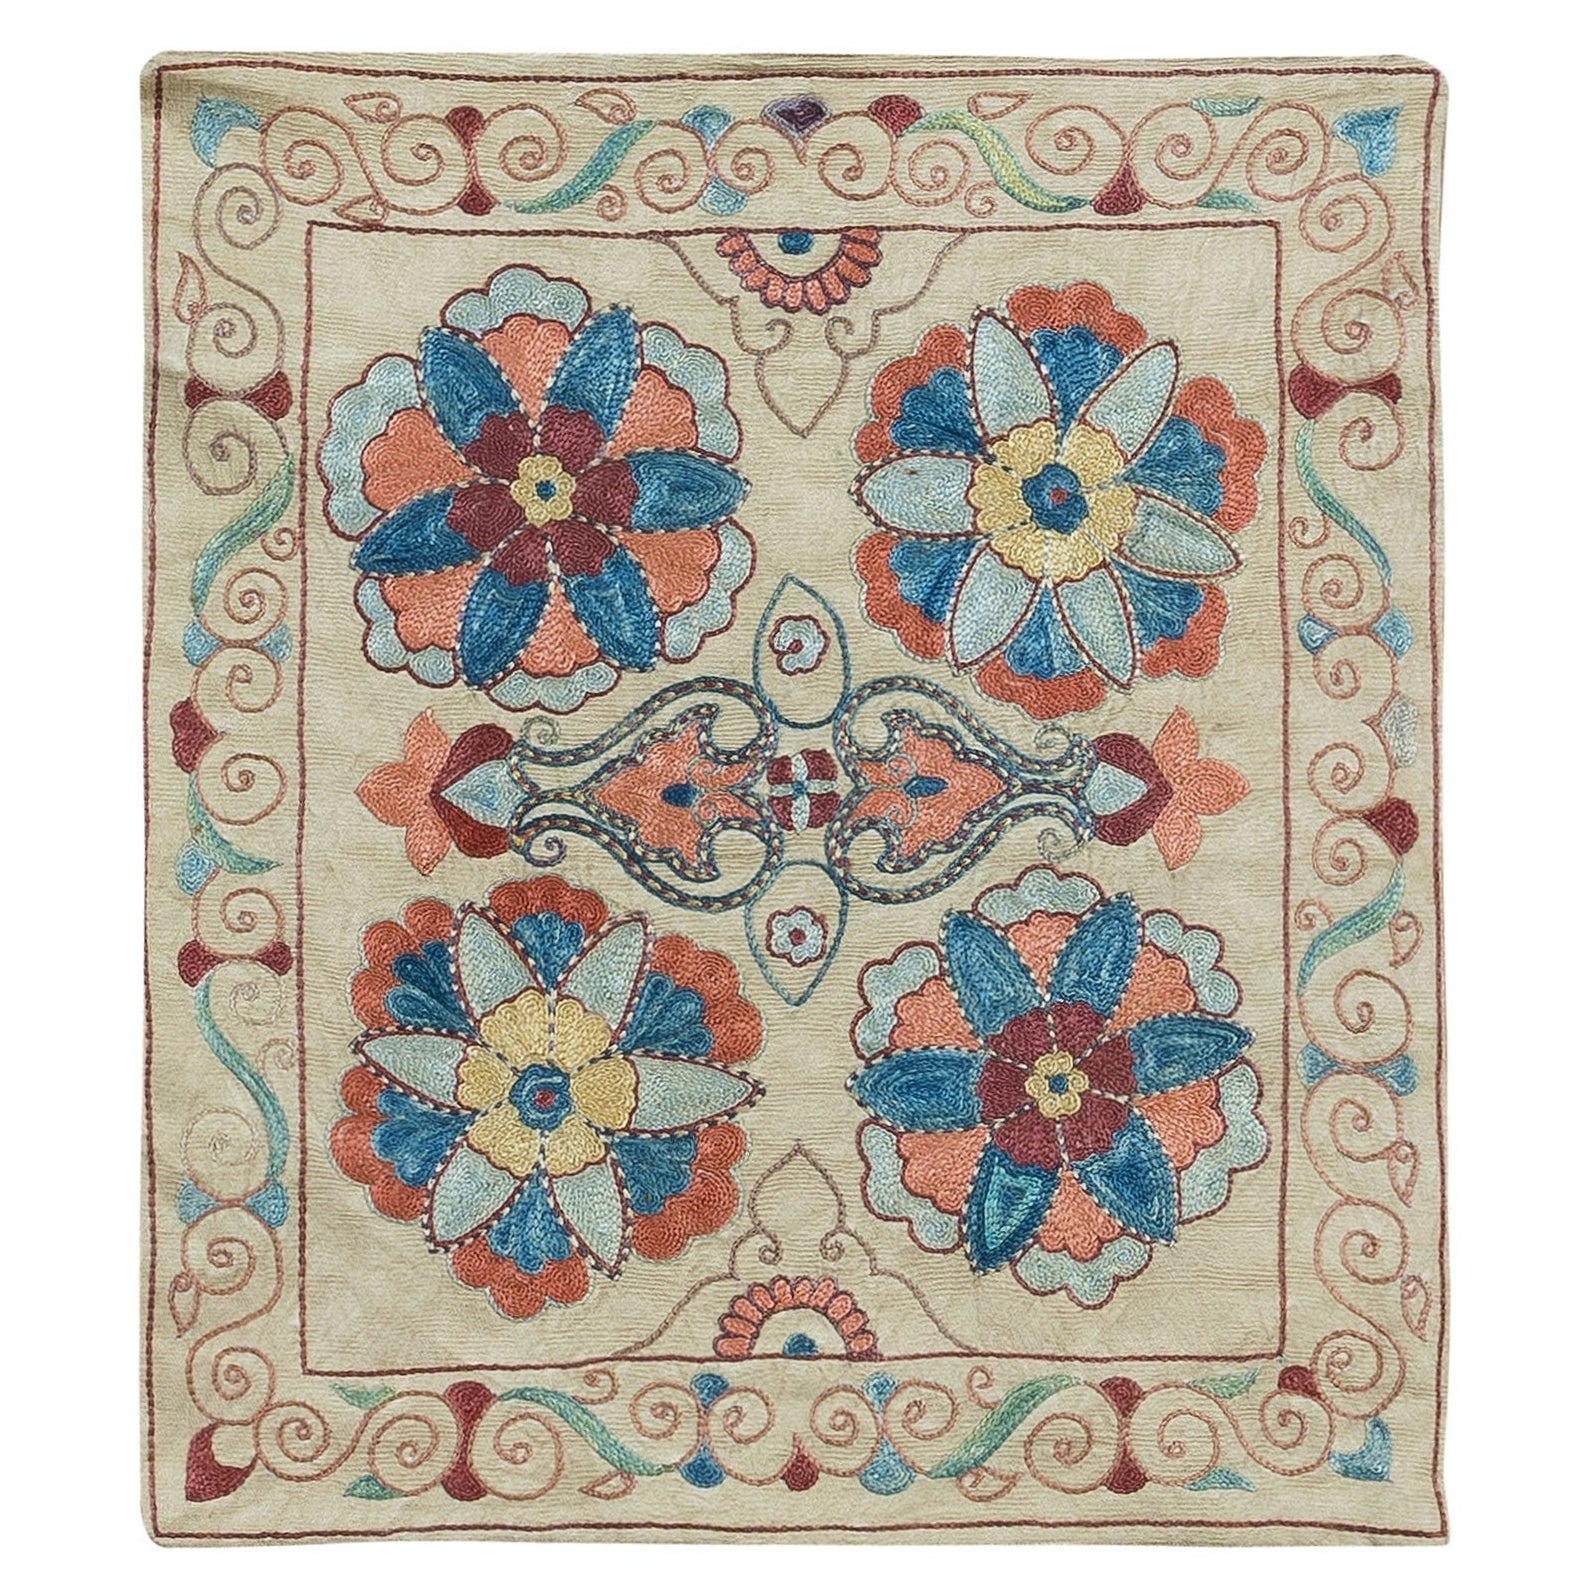 Uzbek Floral Pattern Suzani Cushion Cover, Embroidered Pillow, All Silk For Sale